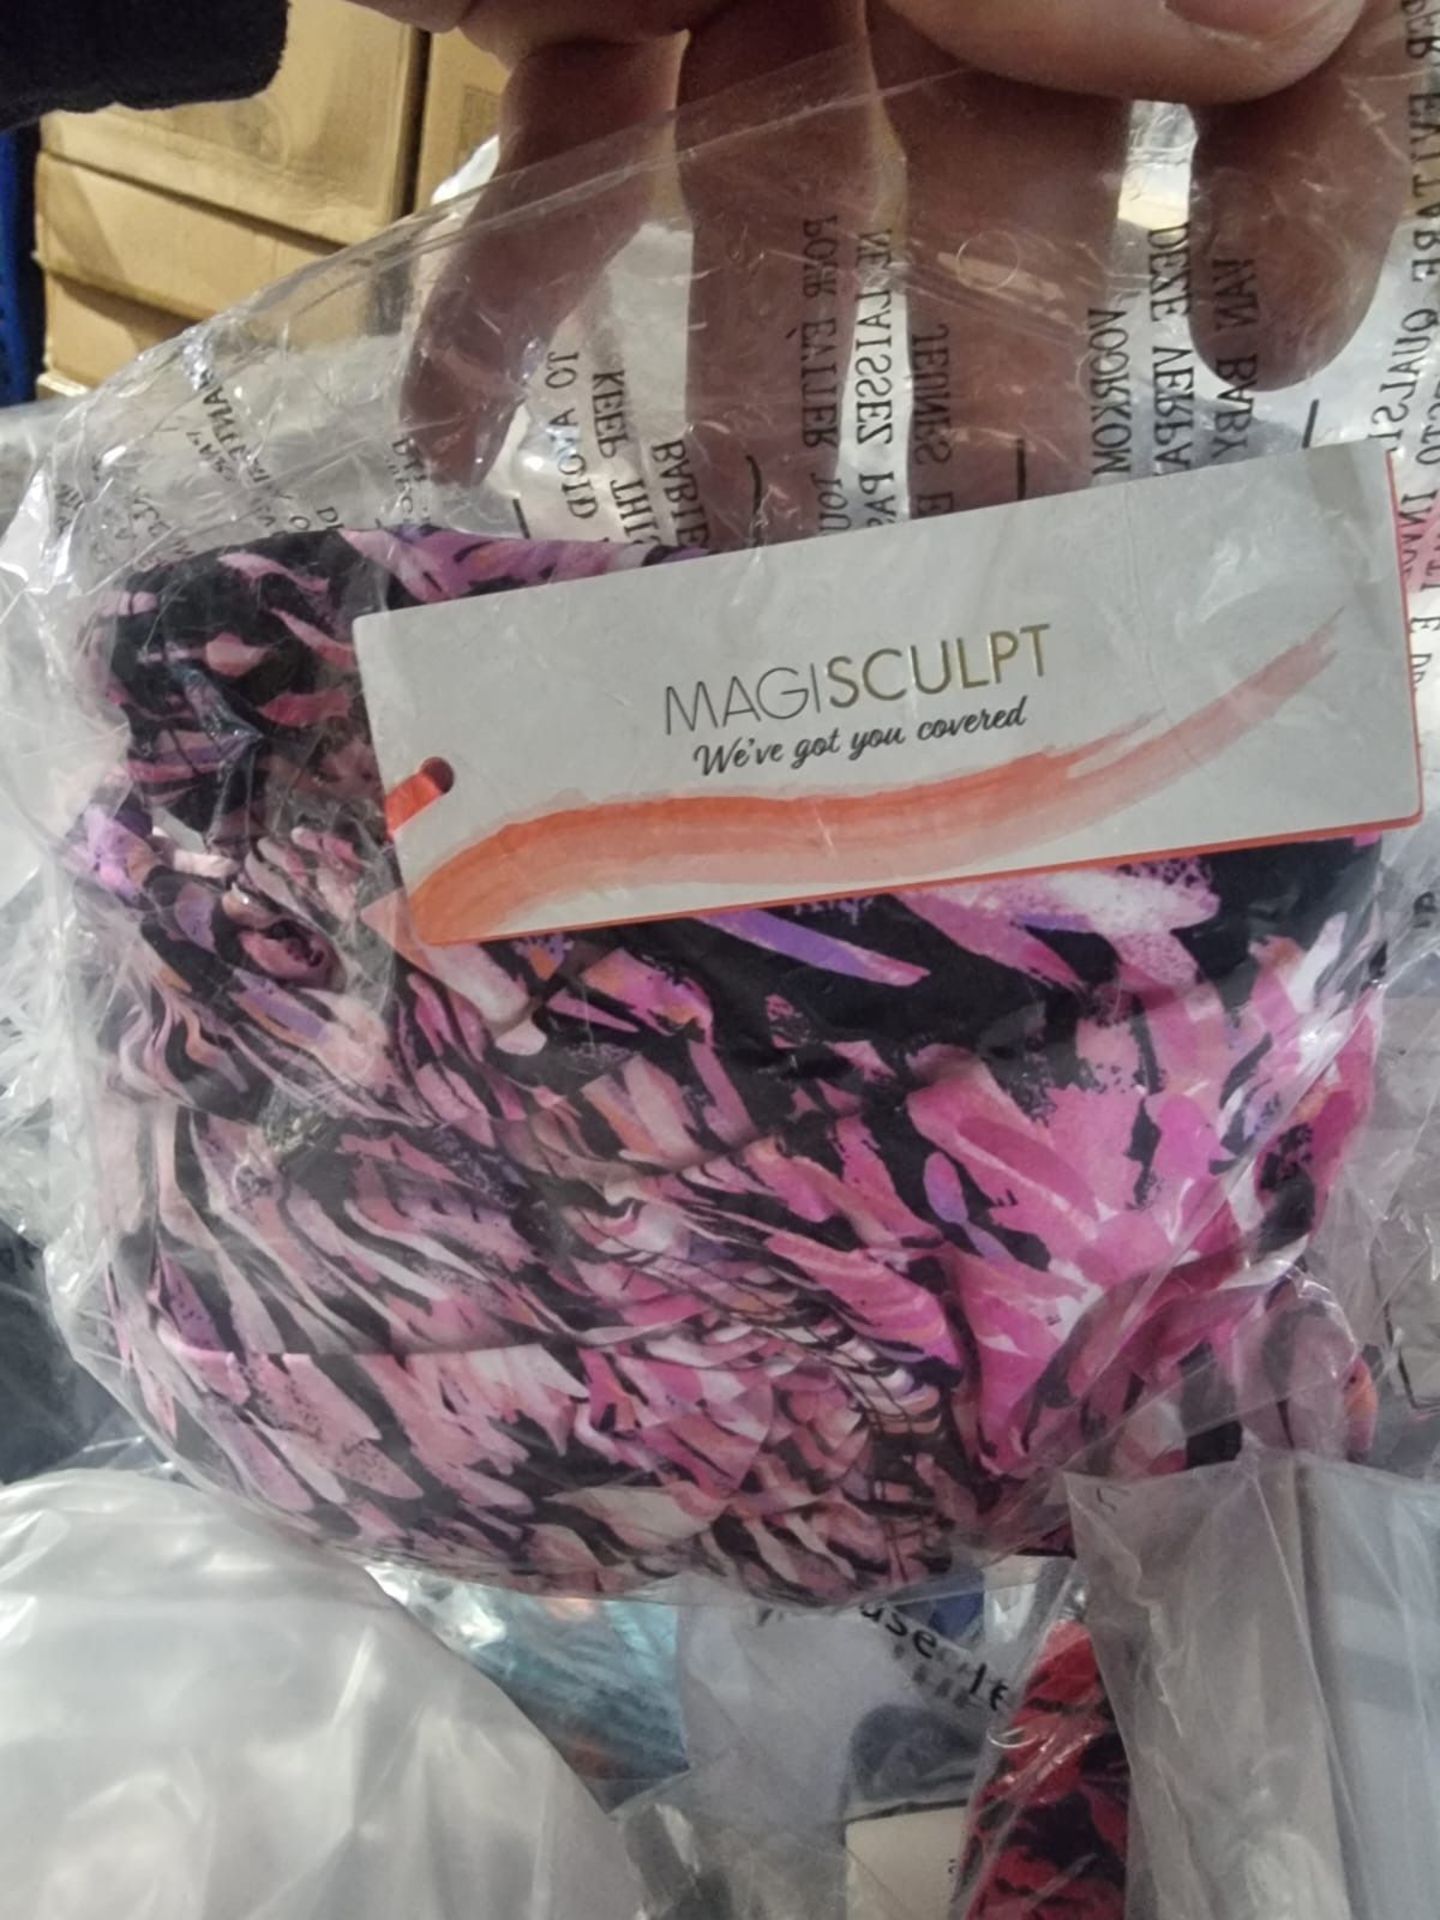 100 x NEW PACKAGED ASSORTED SWIM & UNDERWEAR FROM BRAND SUCH AS WONDERBRA, BOUX AVENUE, ANN SUMMERS, - Image 39 of 53